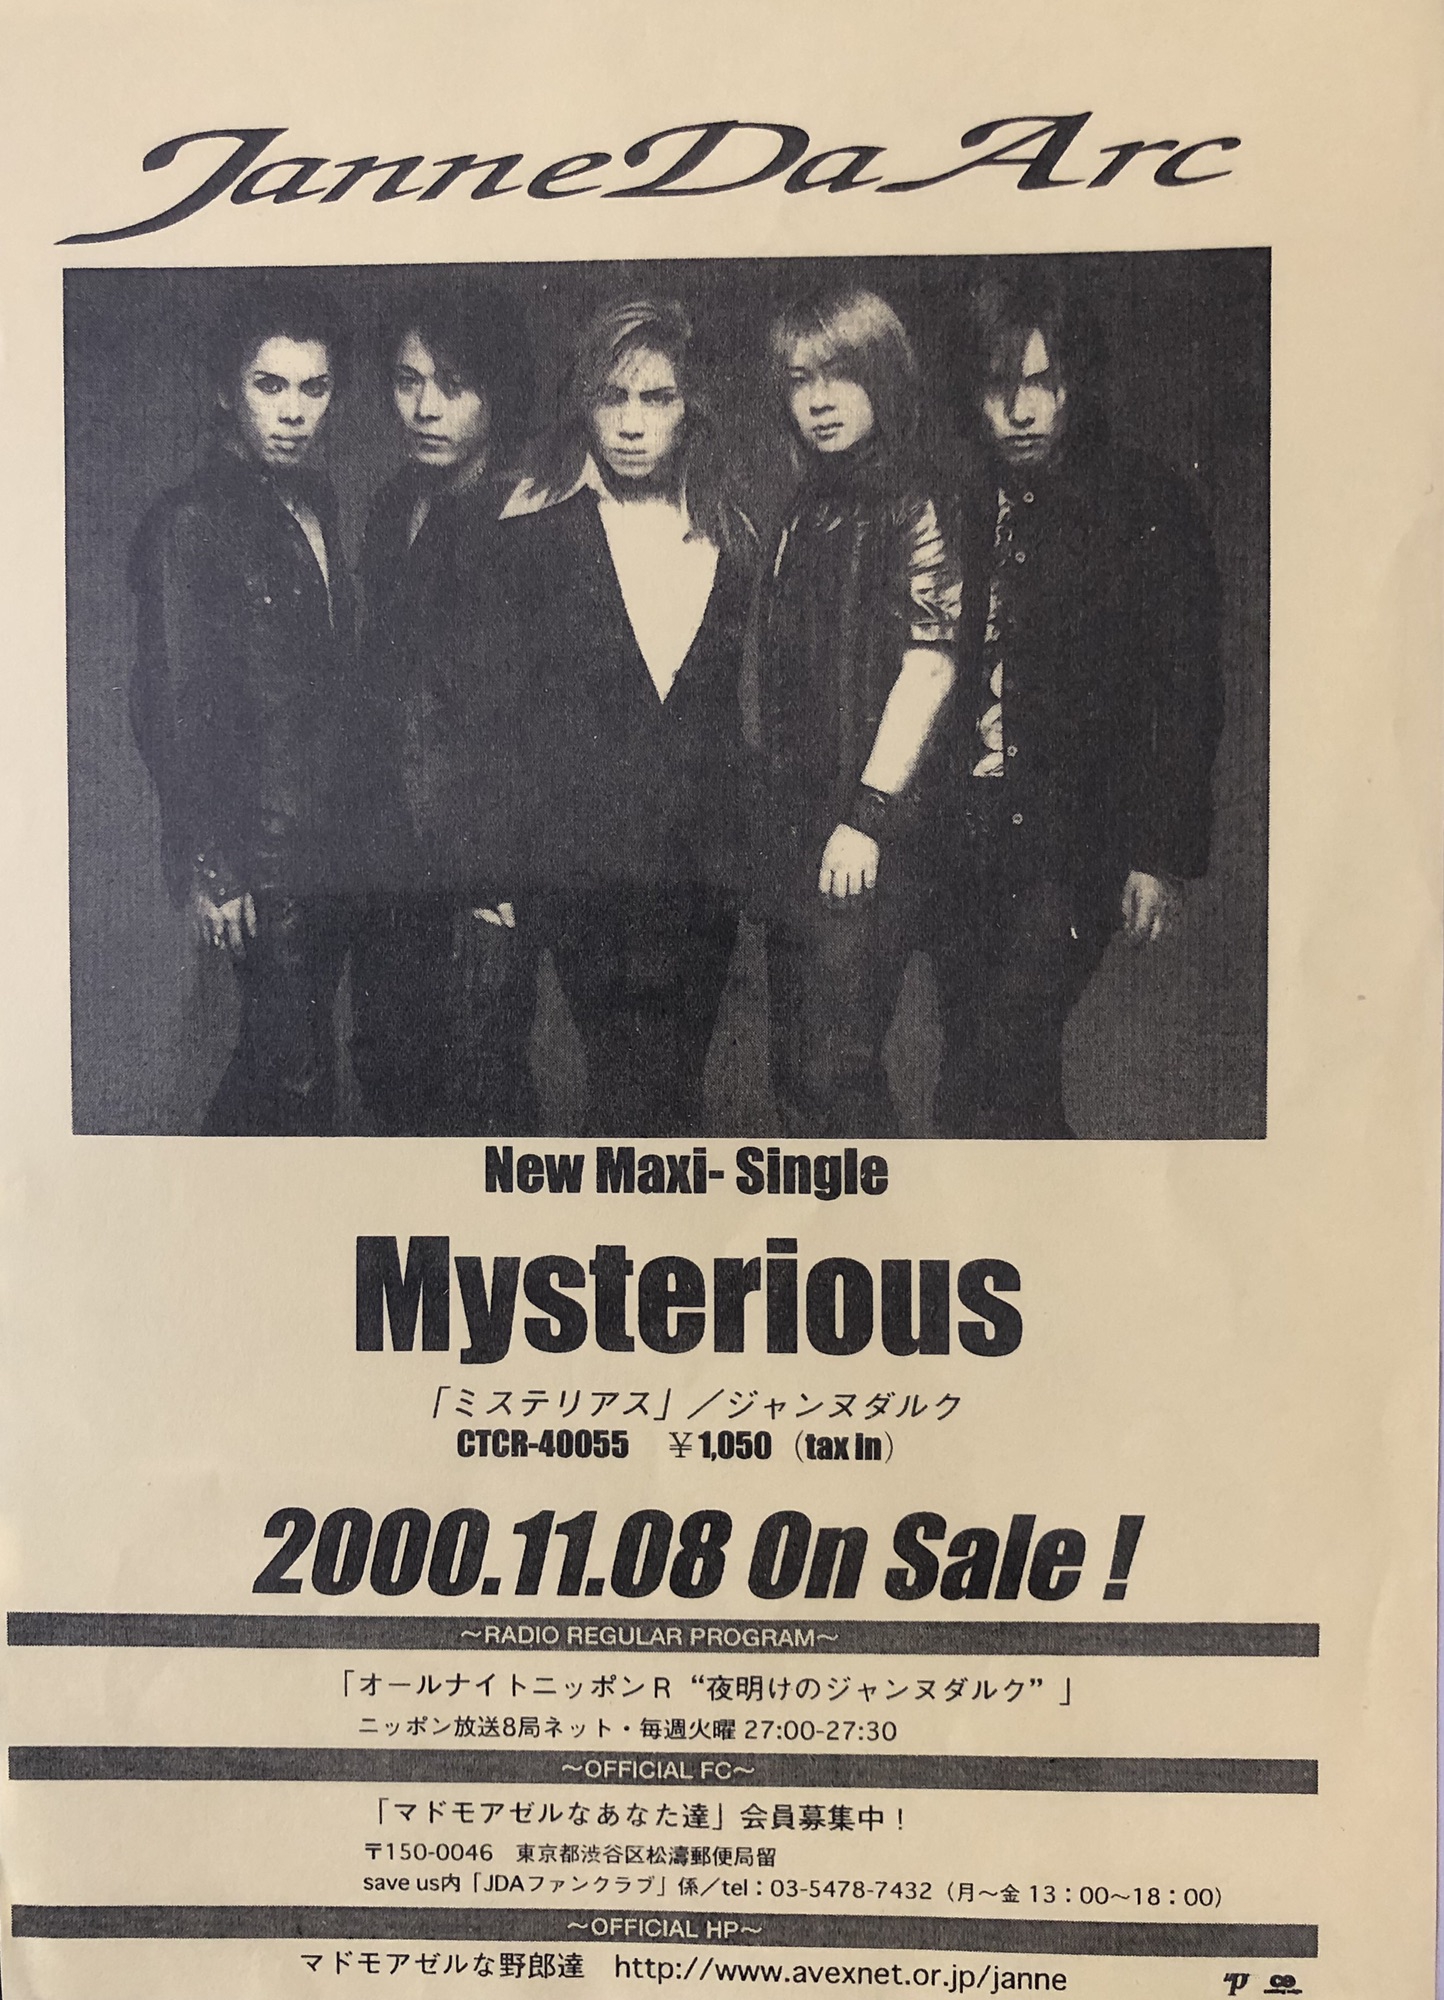 6th single〝Mysterious〟 | Janne Da Arc discography 〝LEGEND OF